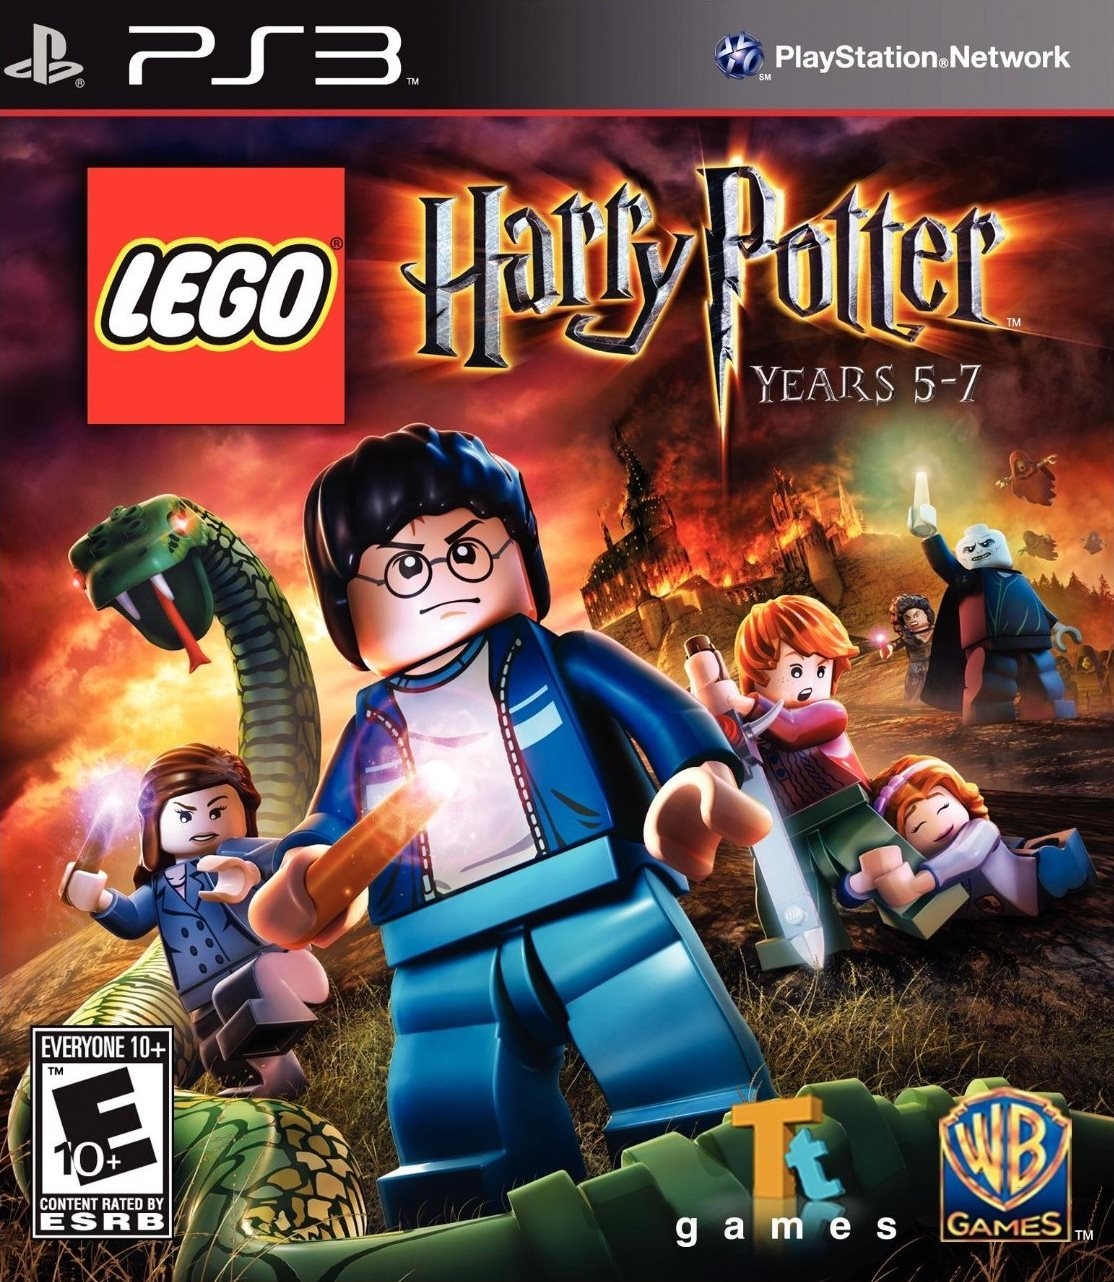 Lego Harry potter years 5-7/PS3